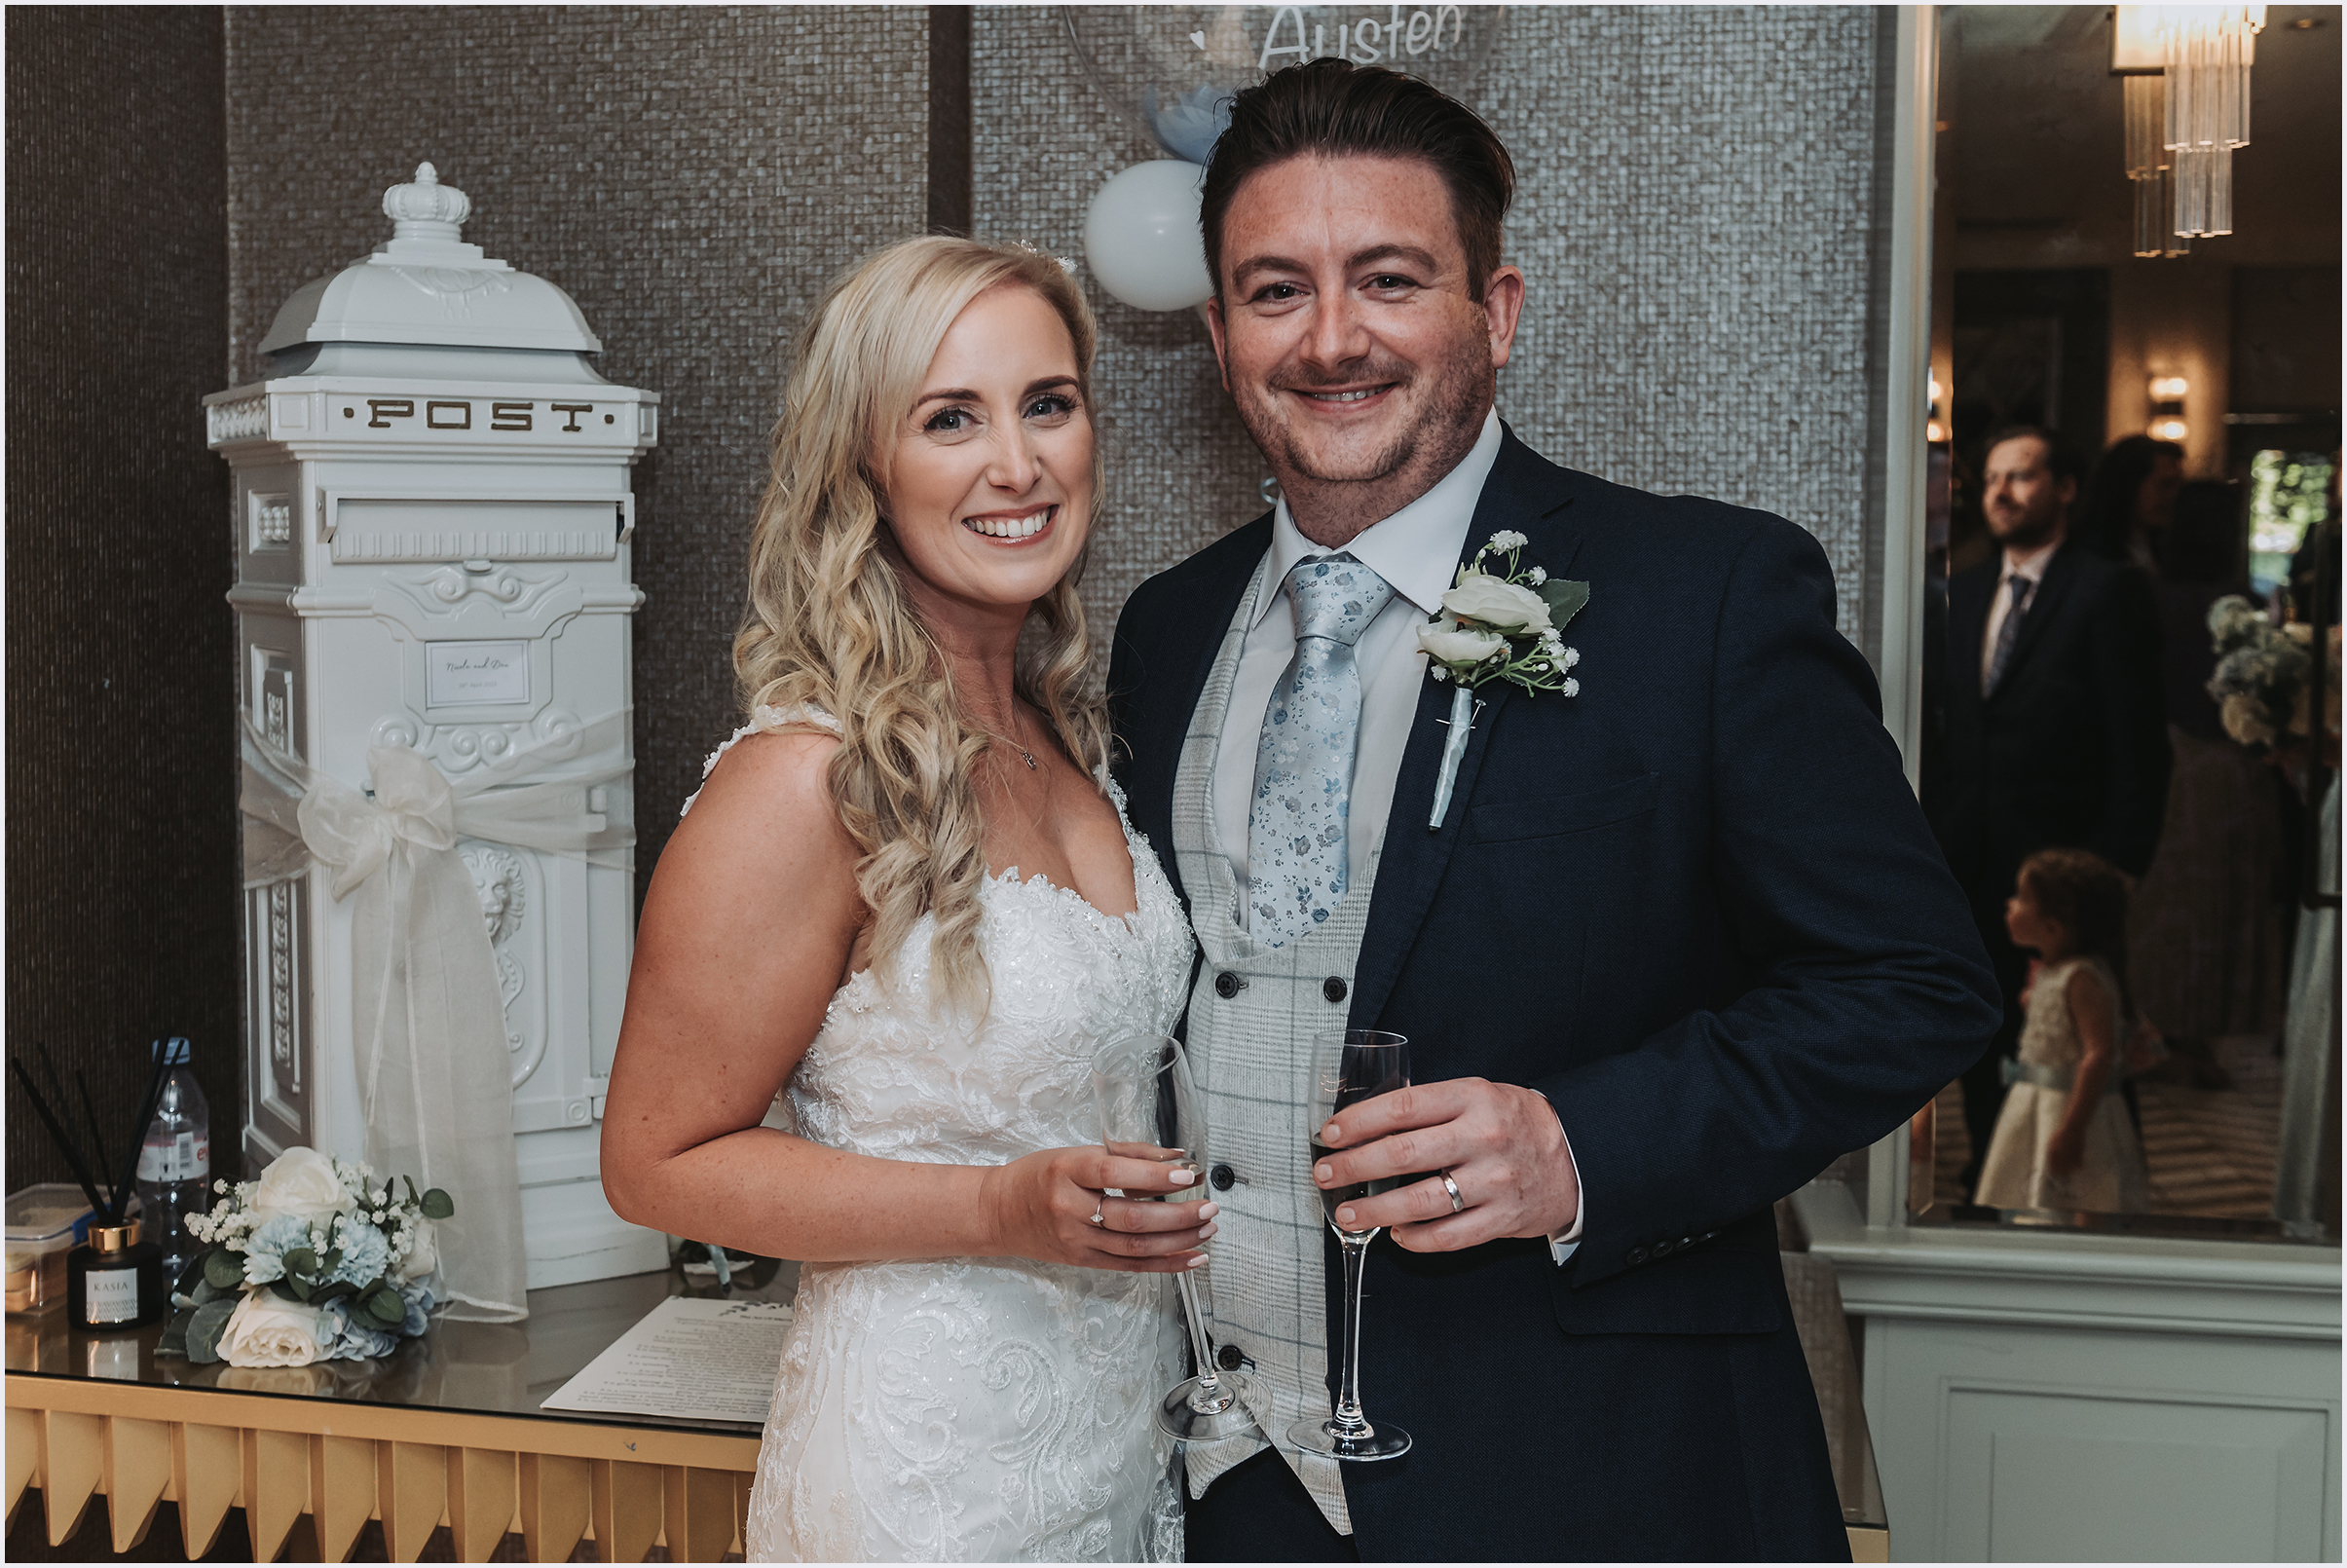 A newly married couple standing close together smiling at the camera during the drinks reception at their wedding.  Image captured by north Wales Wedding Photographer Helena Jayne Photography.